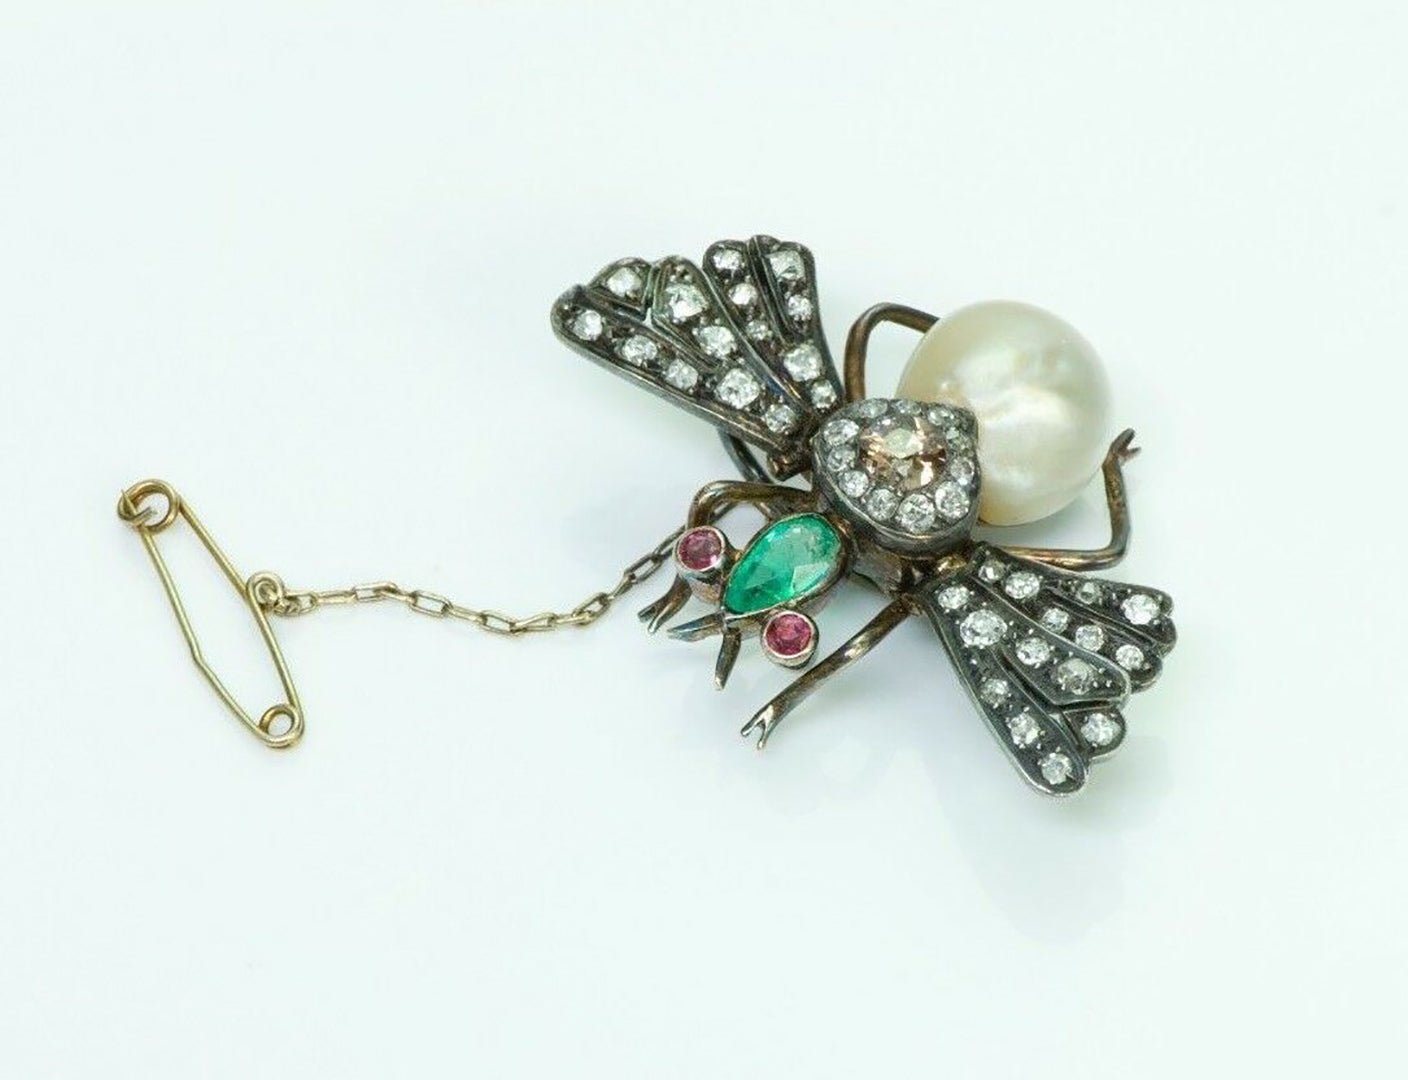 Antique French Diamond Emerald Pearl Ruby Silver Fly Pin Brooch